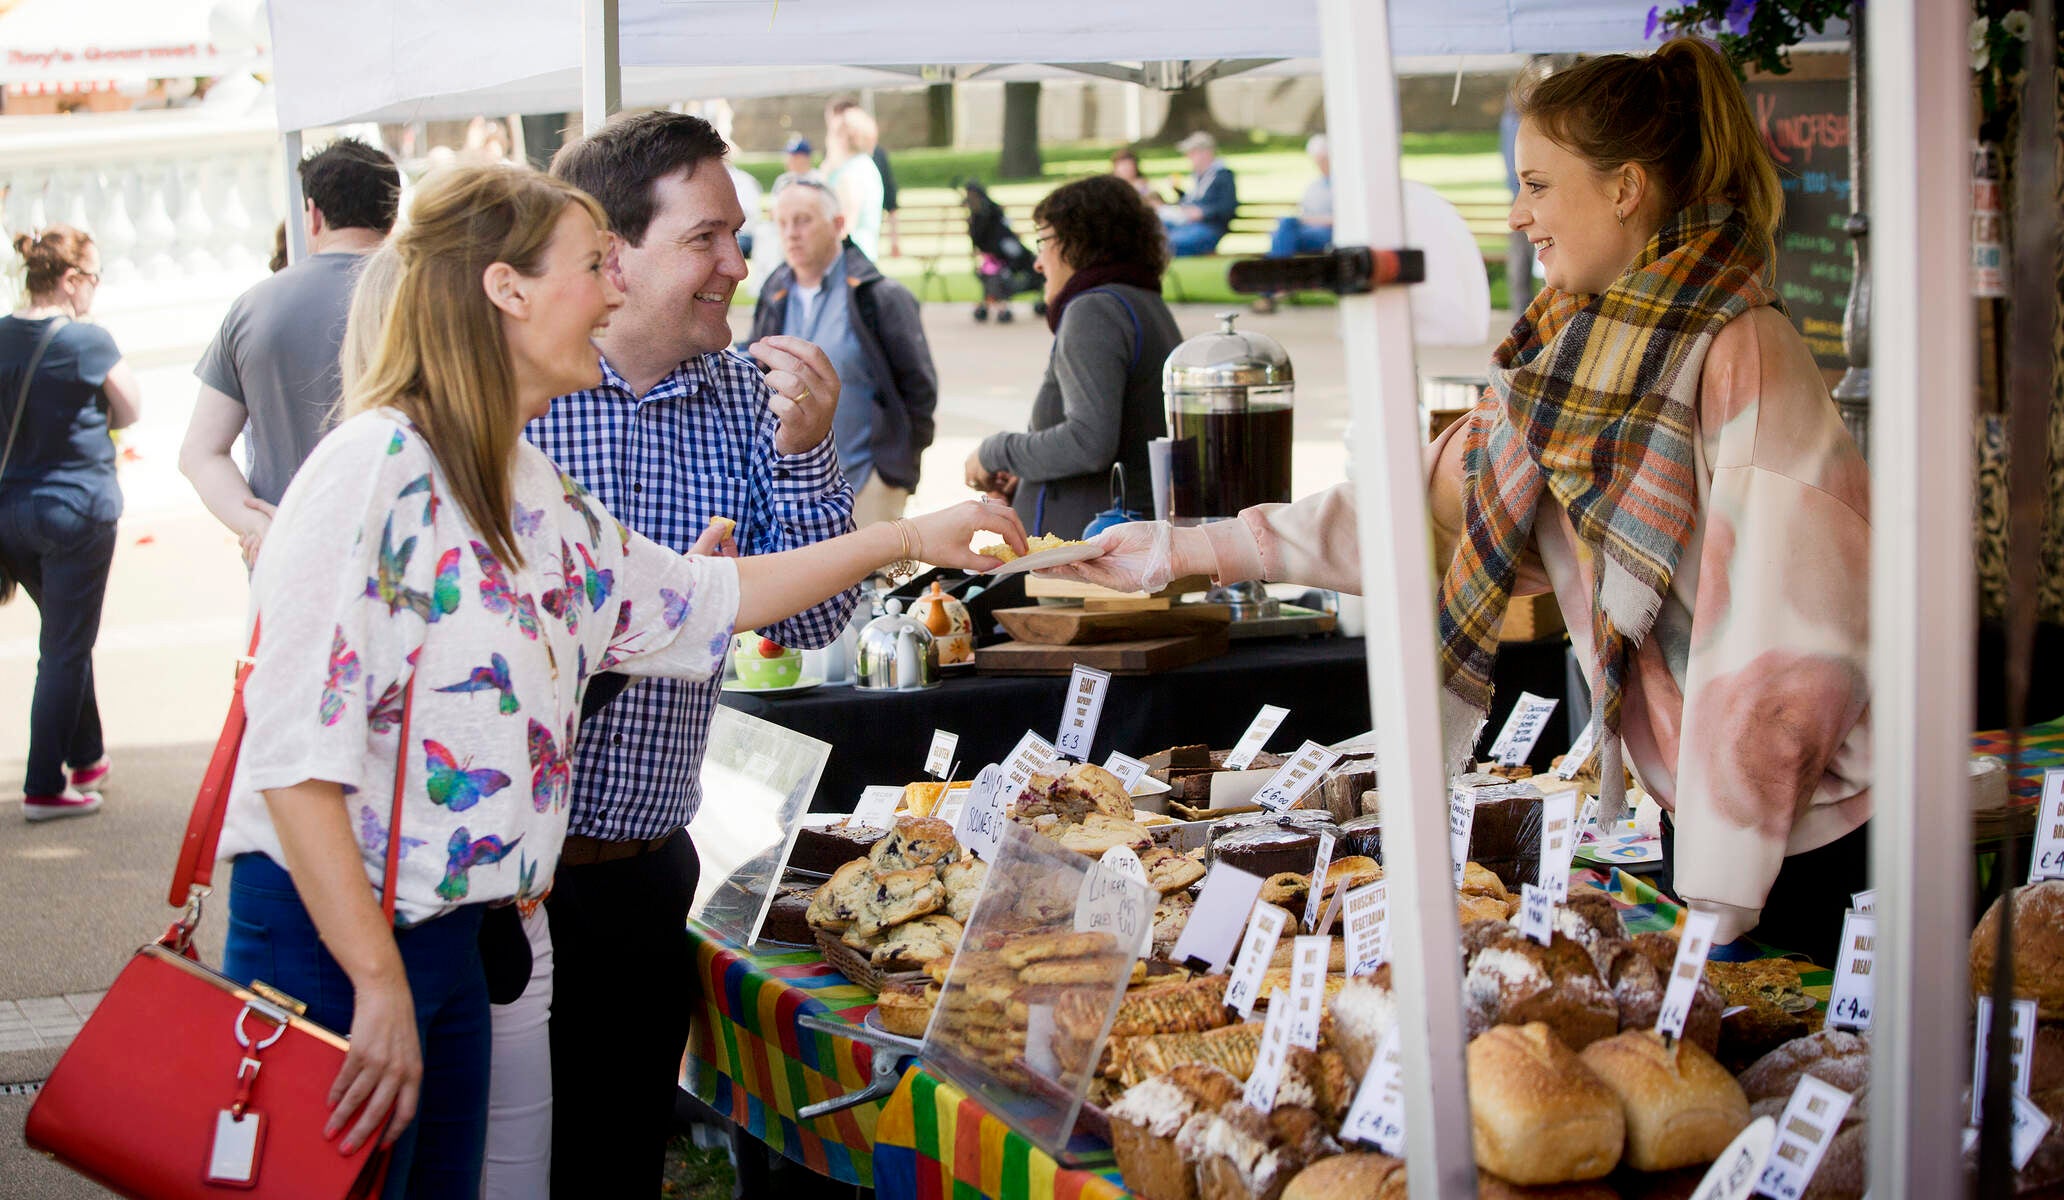 Image of people tasting food at a stall in the People's Park Market in Dun Laoghaire.